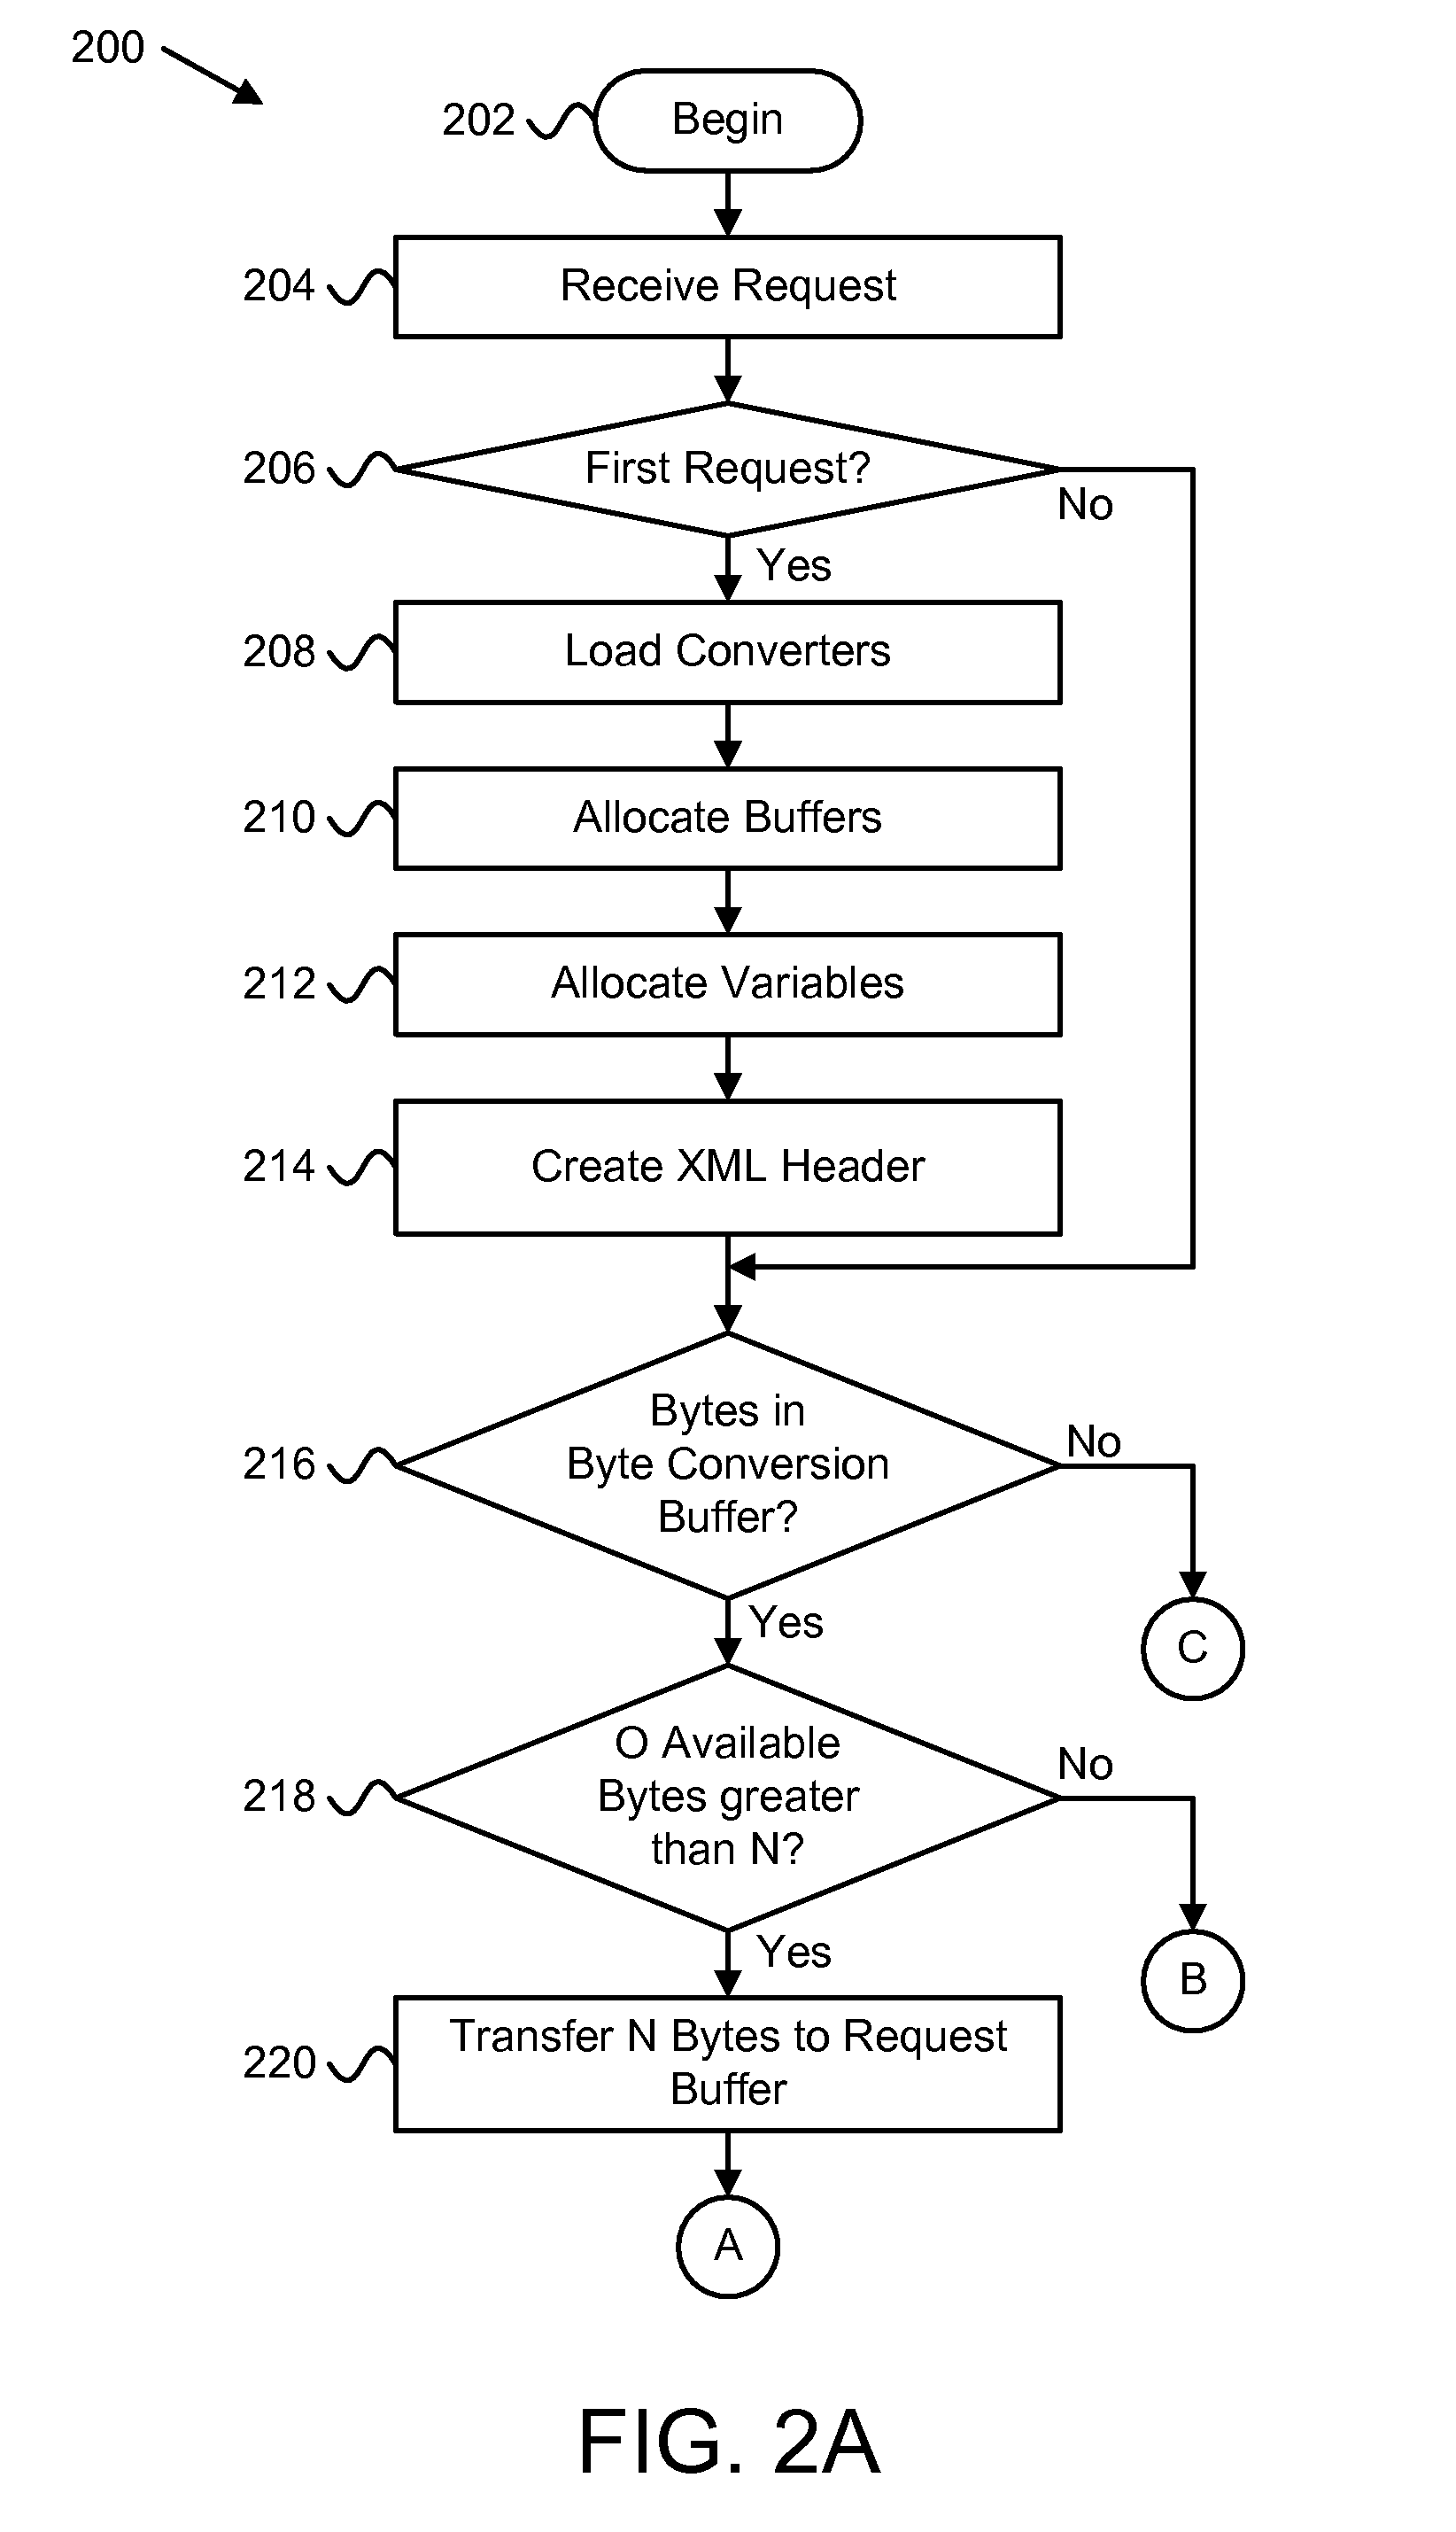 Apparatus, system, and method for incremental encoding conversion of XML data using JAVA